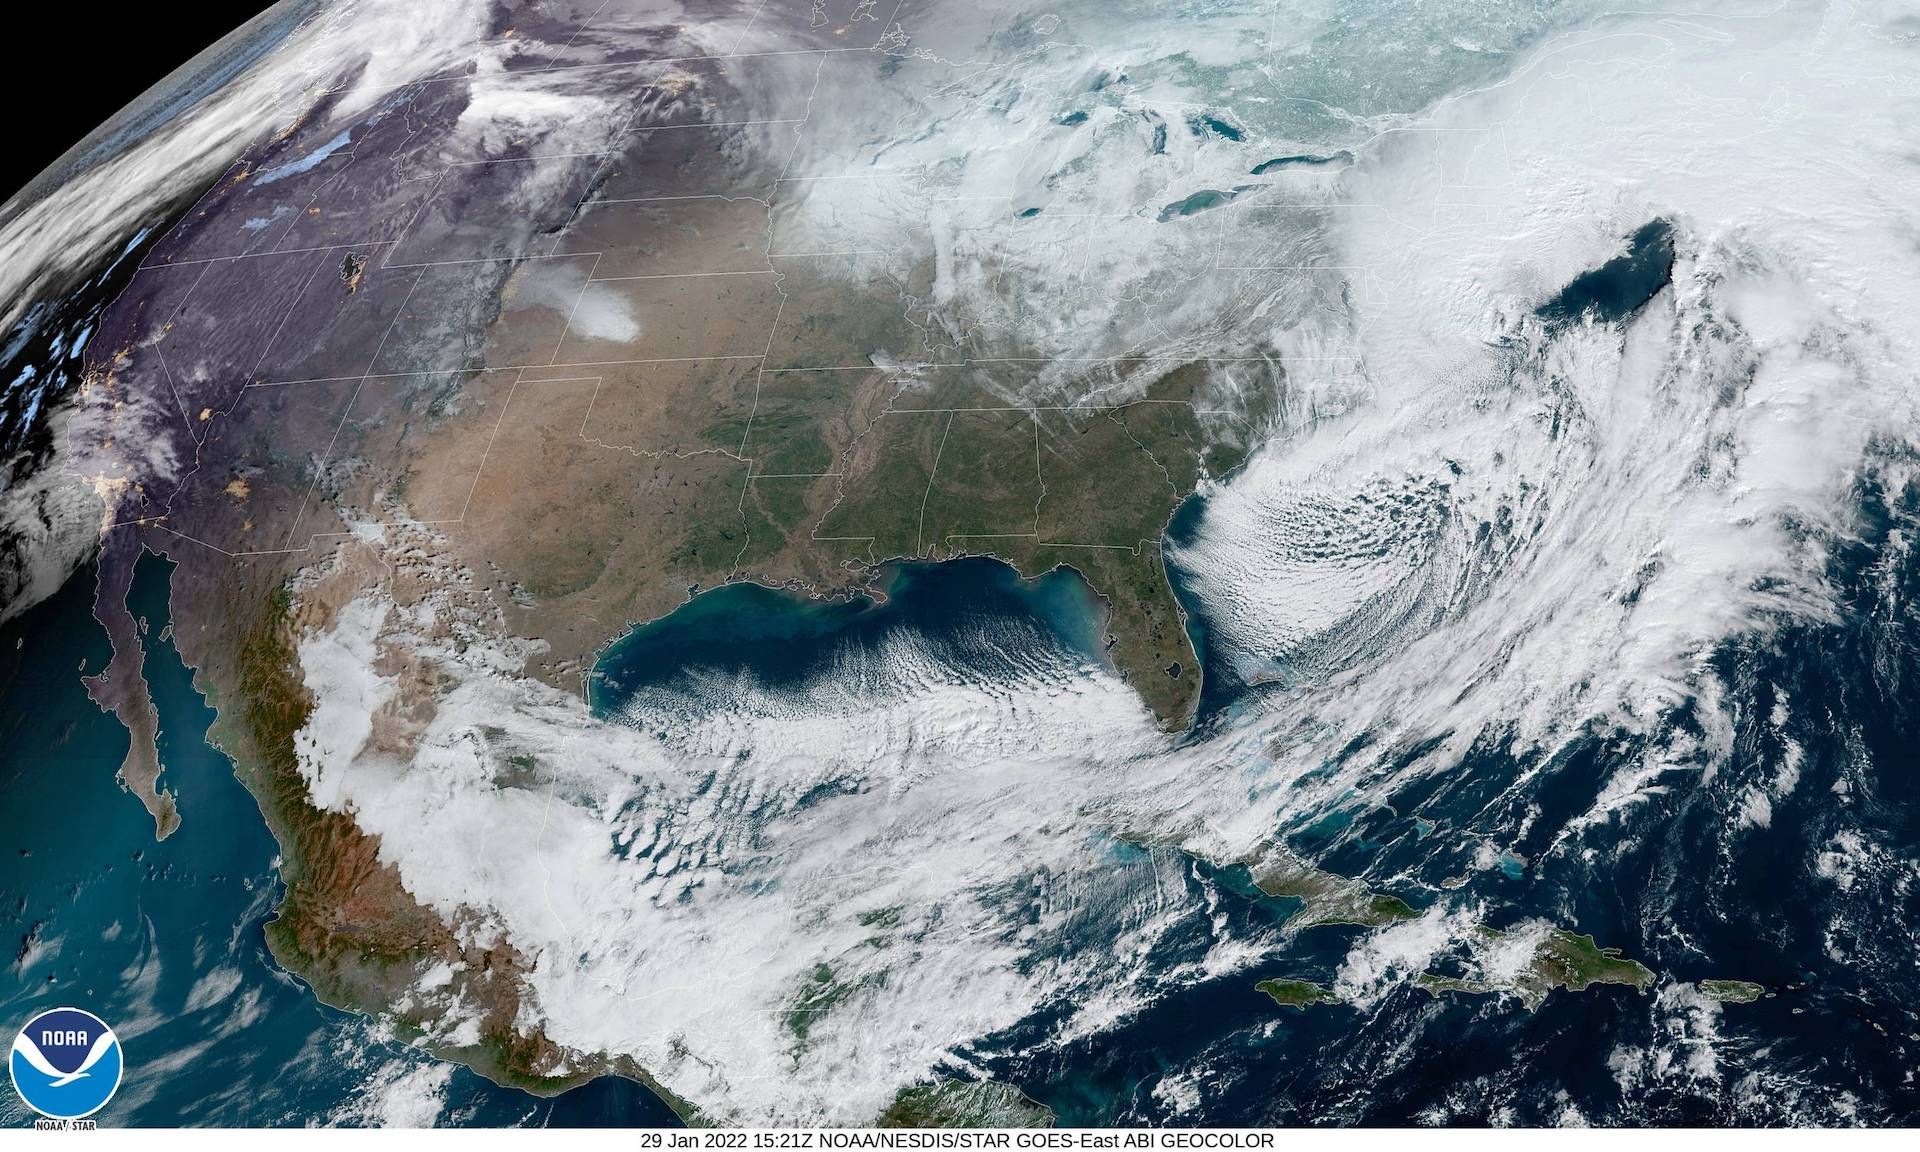 Satellite image showing a powerful blizzard on the East Coast on Jan. 29, 2022.